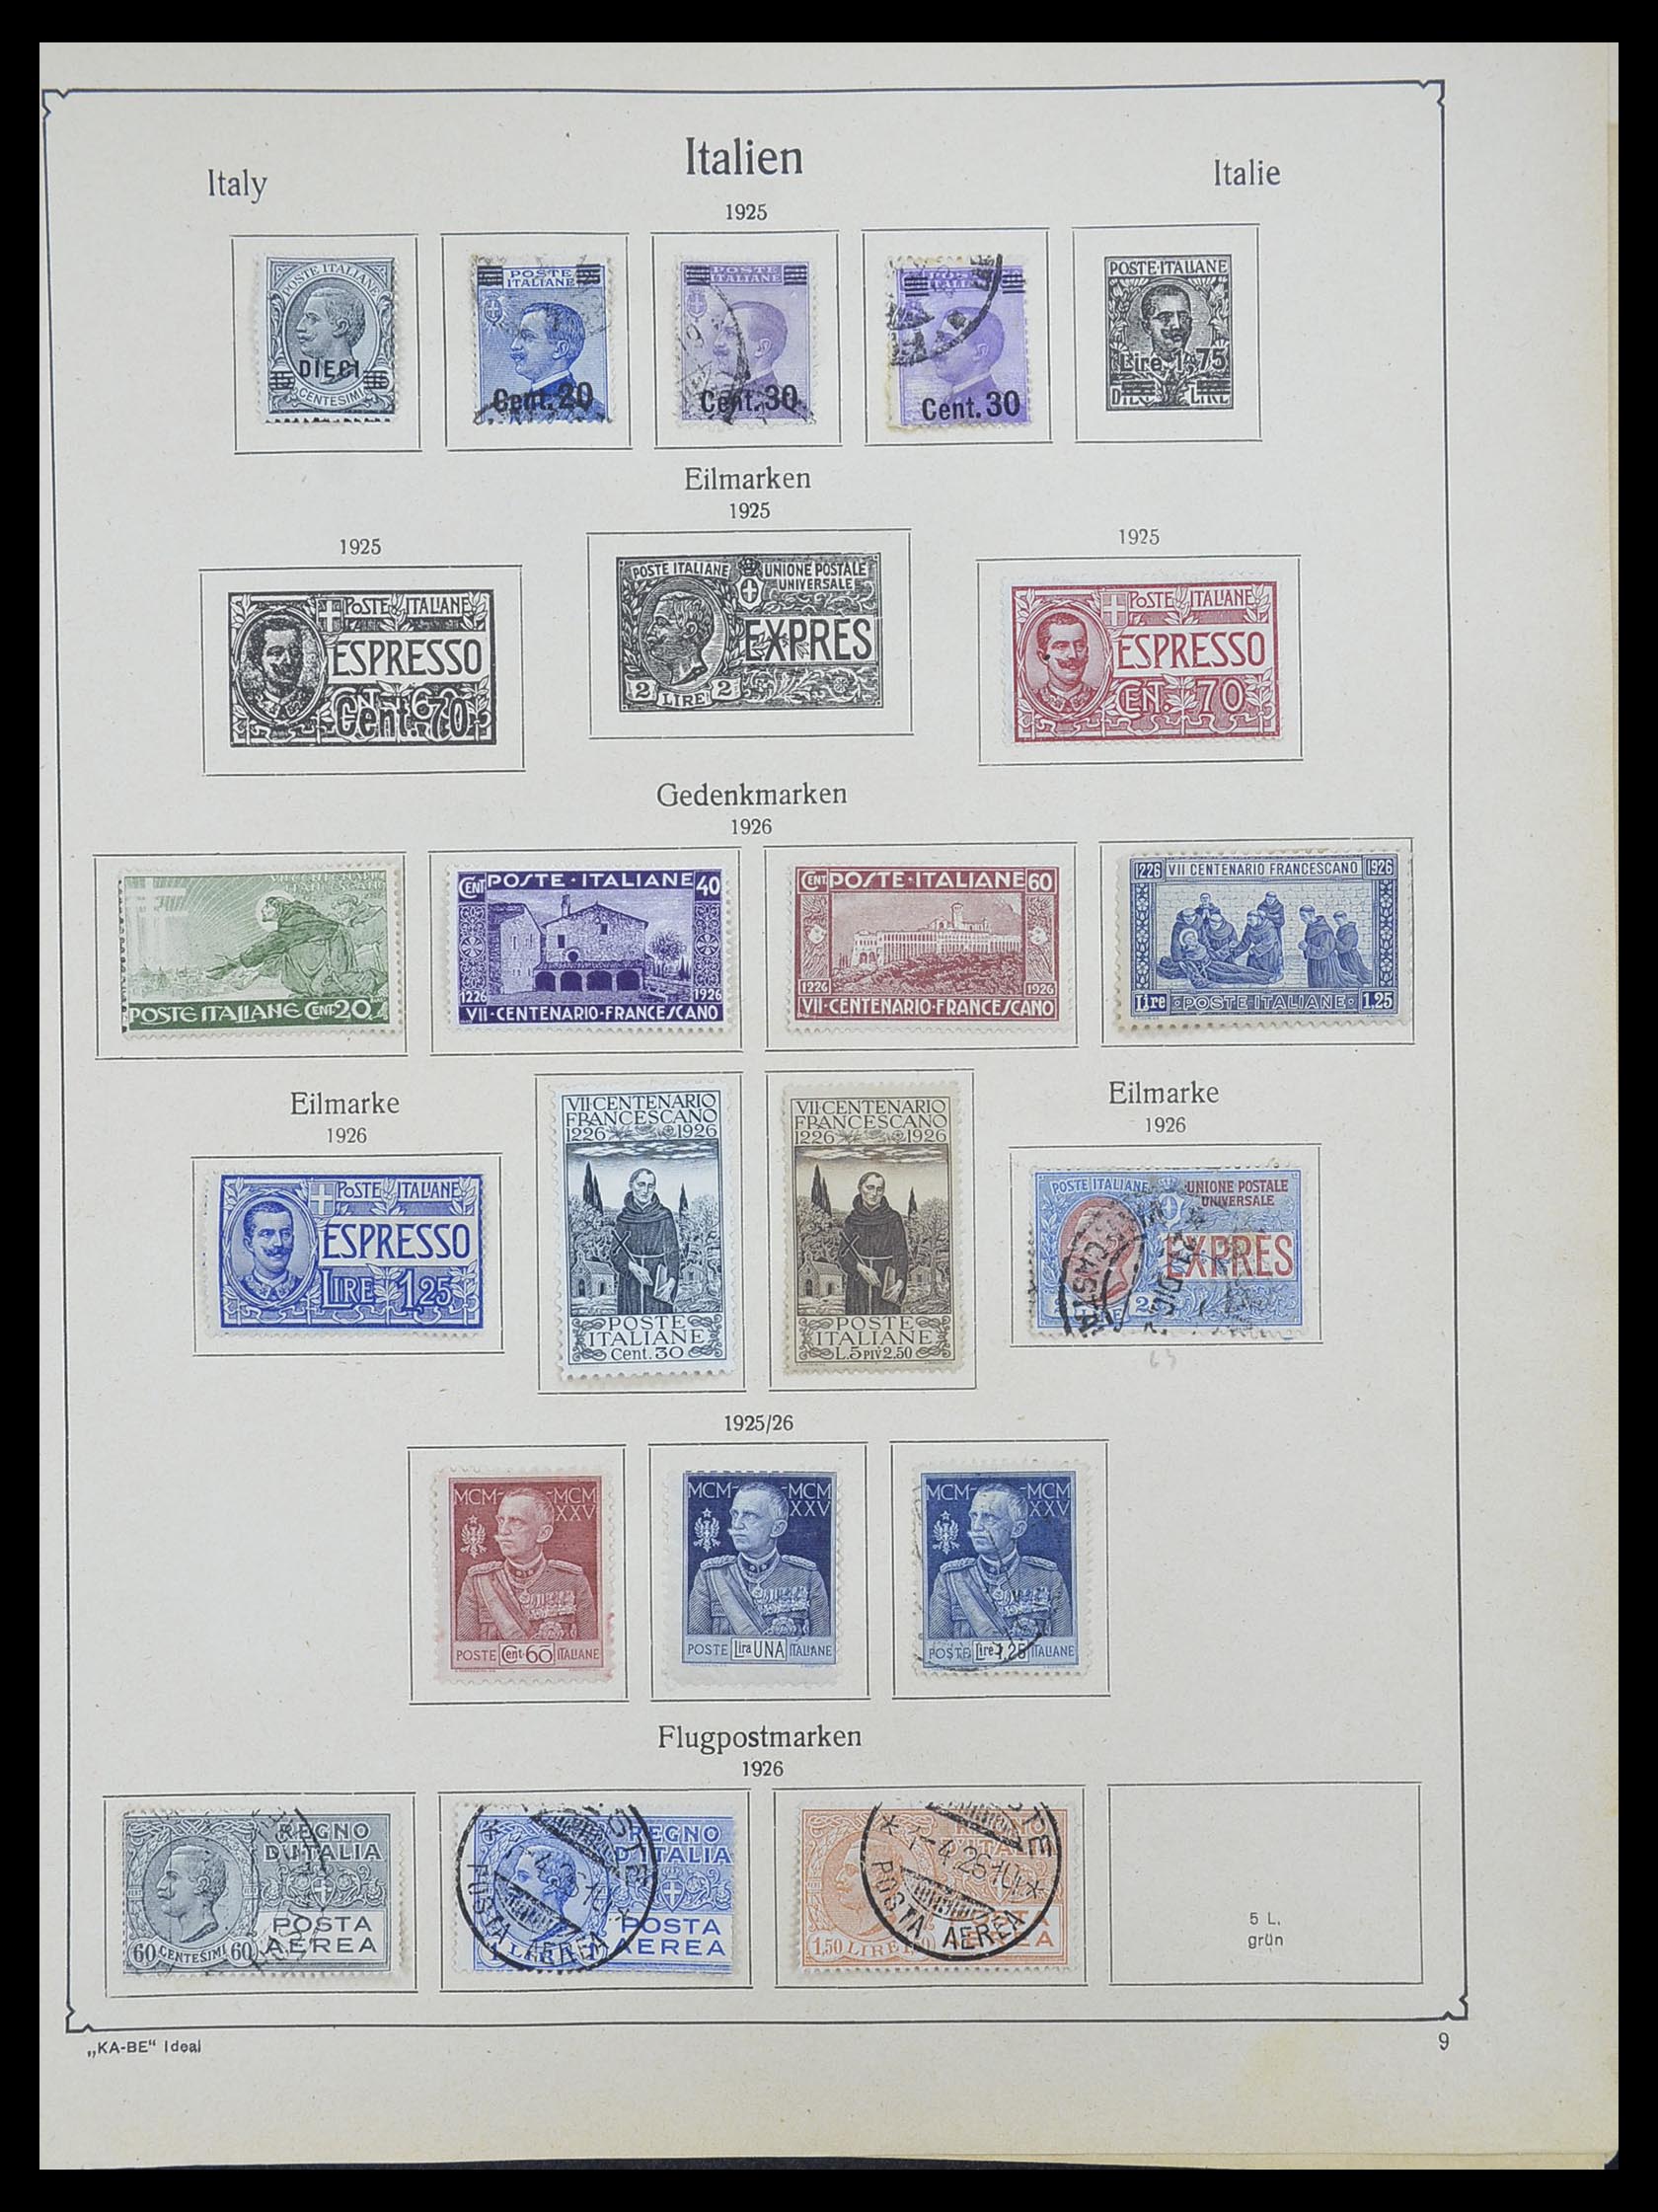 33620 025 - Stamp collection 33620 Italian States/Italy/territories 1851-1935.